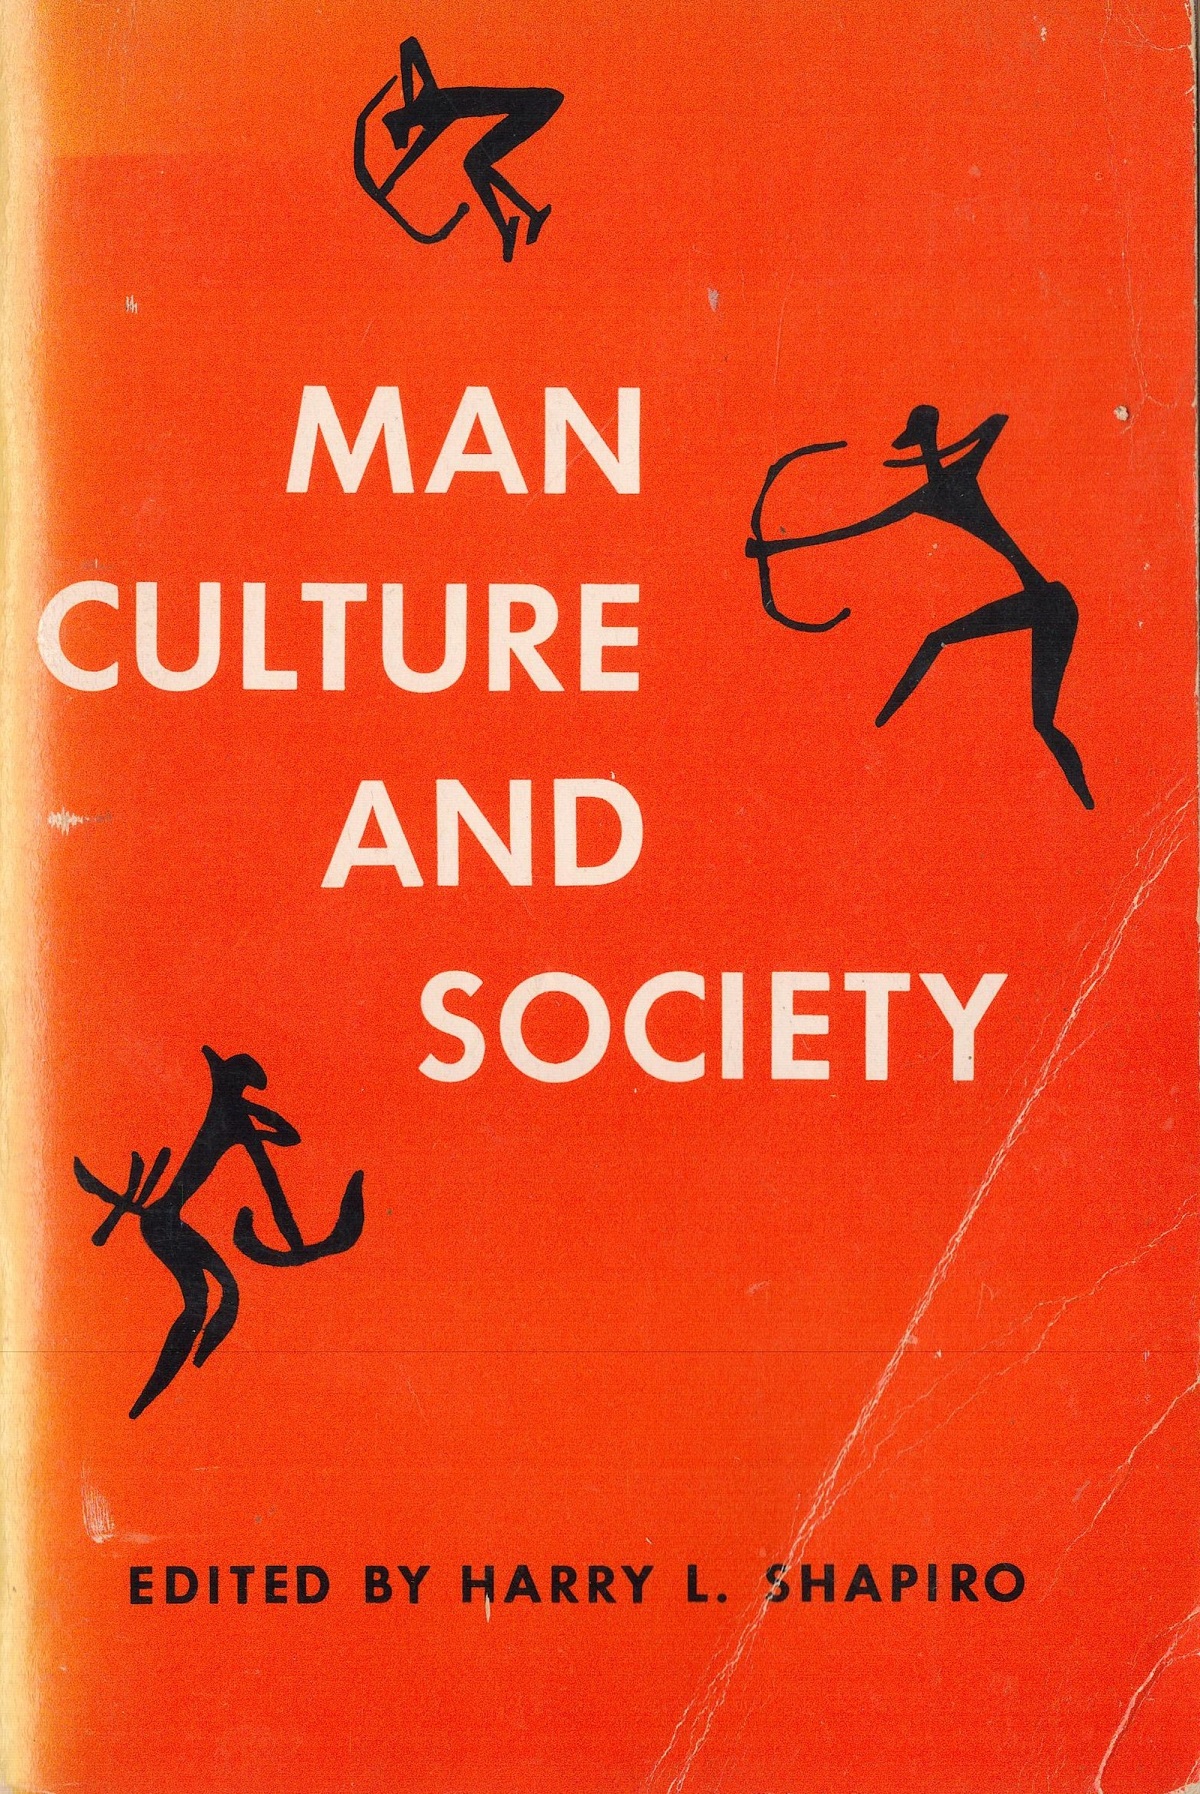 Man, Culture, and Society edited by Harry L Shapiro Softback Book 1971 Revised Edition published